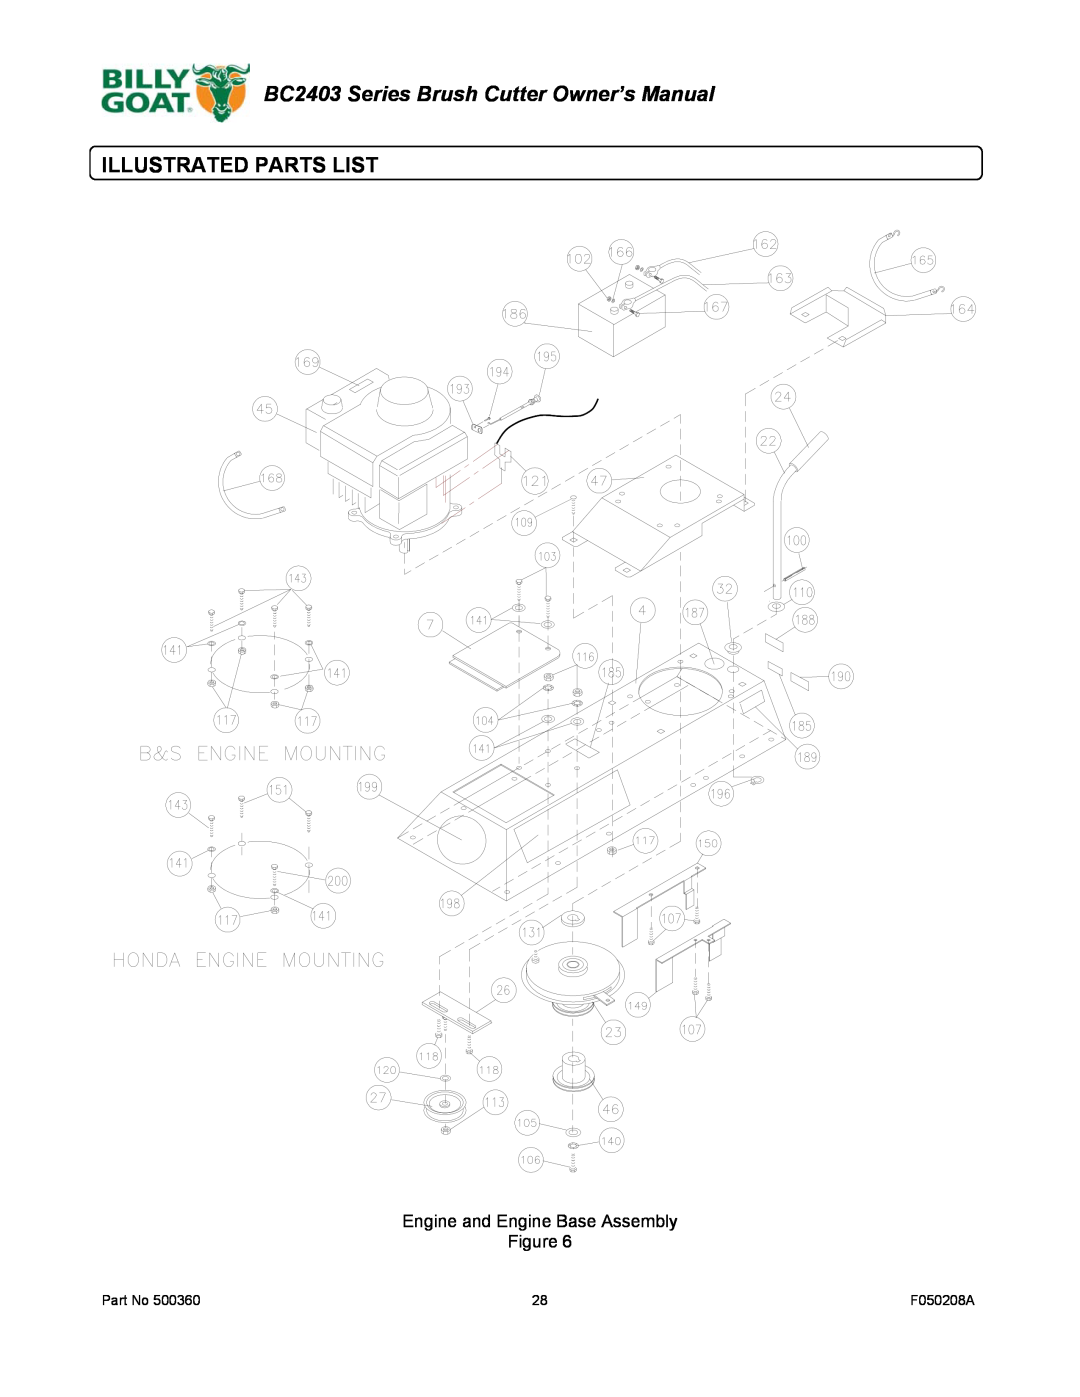 Billy Goat BC2403 Series owner manual Illustrated Parts List, Engine and Engine Base Assembly, F050208A 